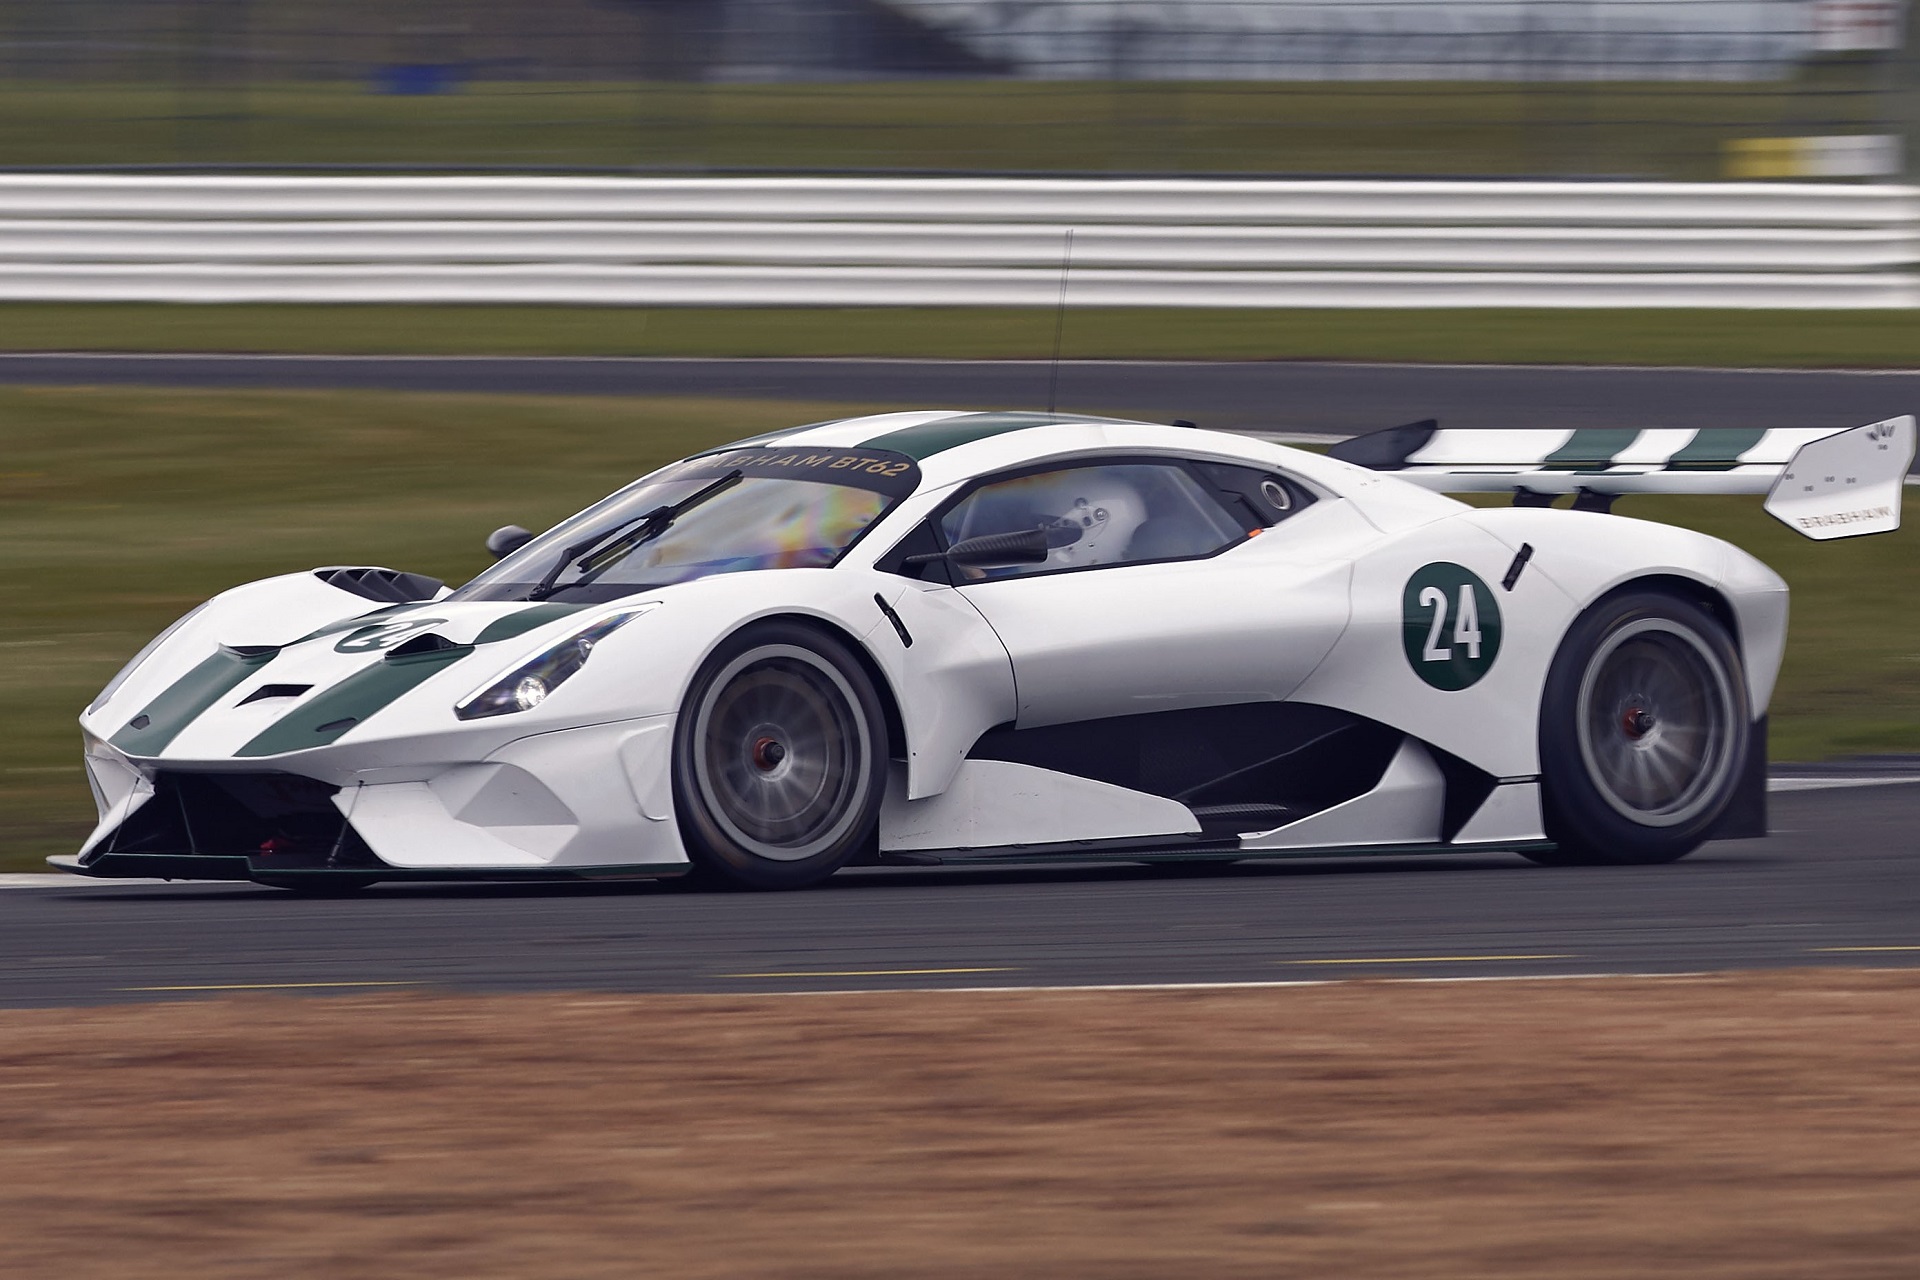 Rolling shot of a white Brabham BT62 on a race track.